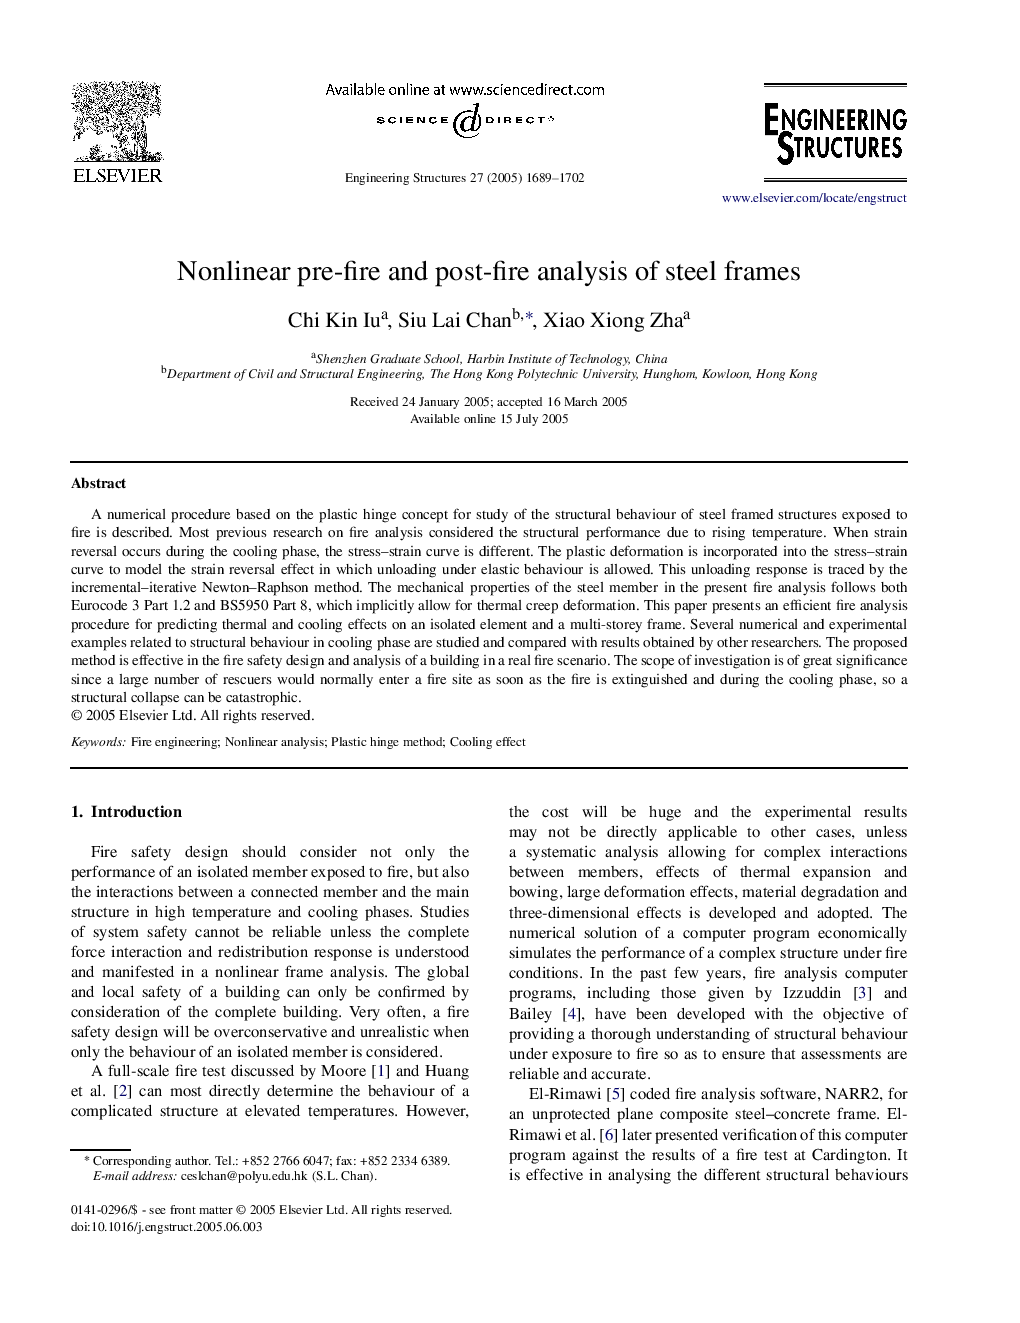 Nonlinear pre-fire and post-fire analysis of steel frames